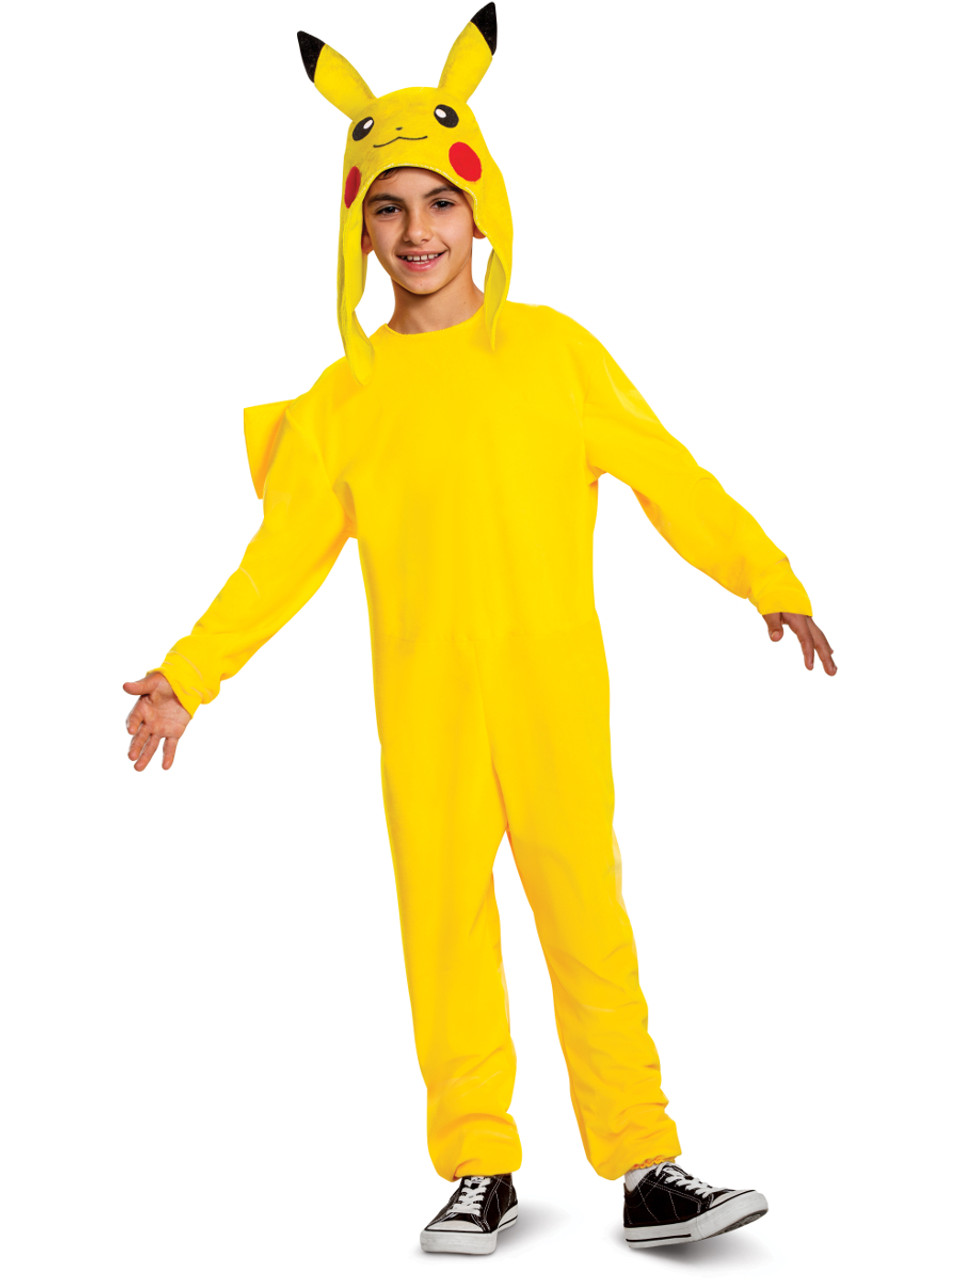 Pokemon Pikachu Costume for Girls, Deluxe Character Outfit, Kids Size  Medium (7-8) Yellow